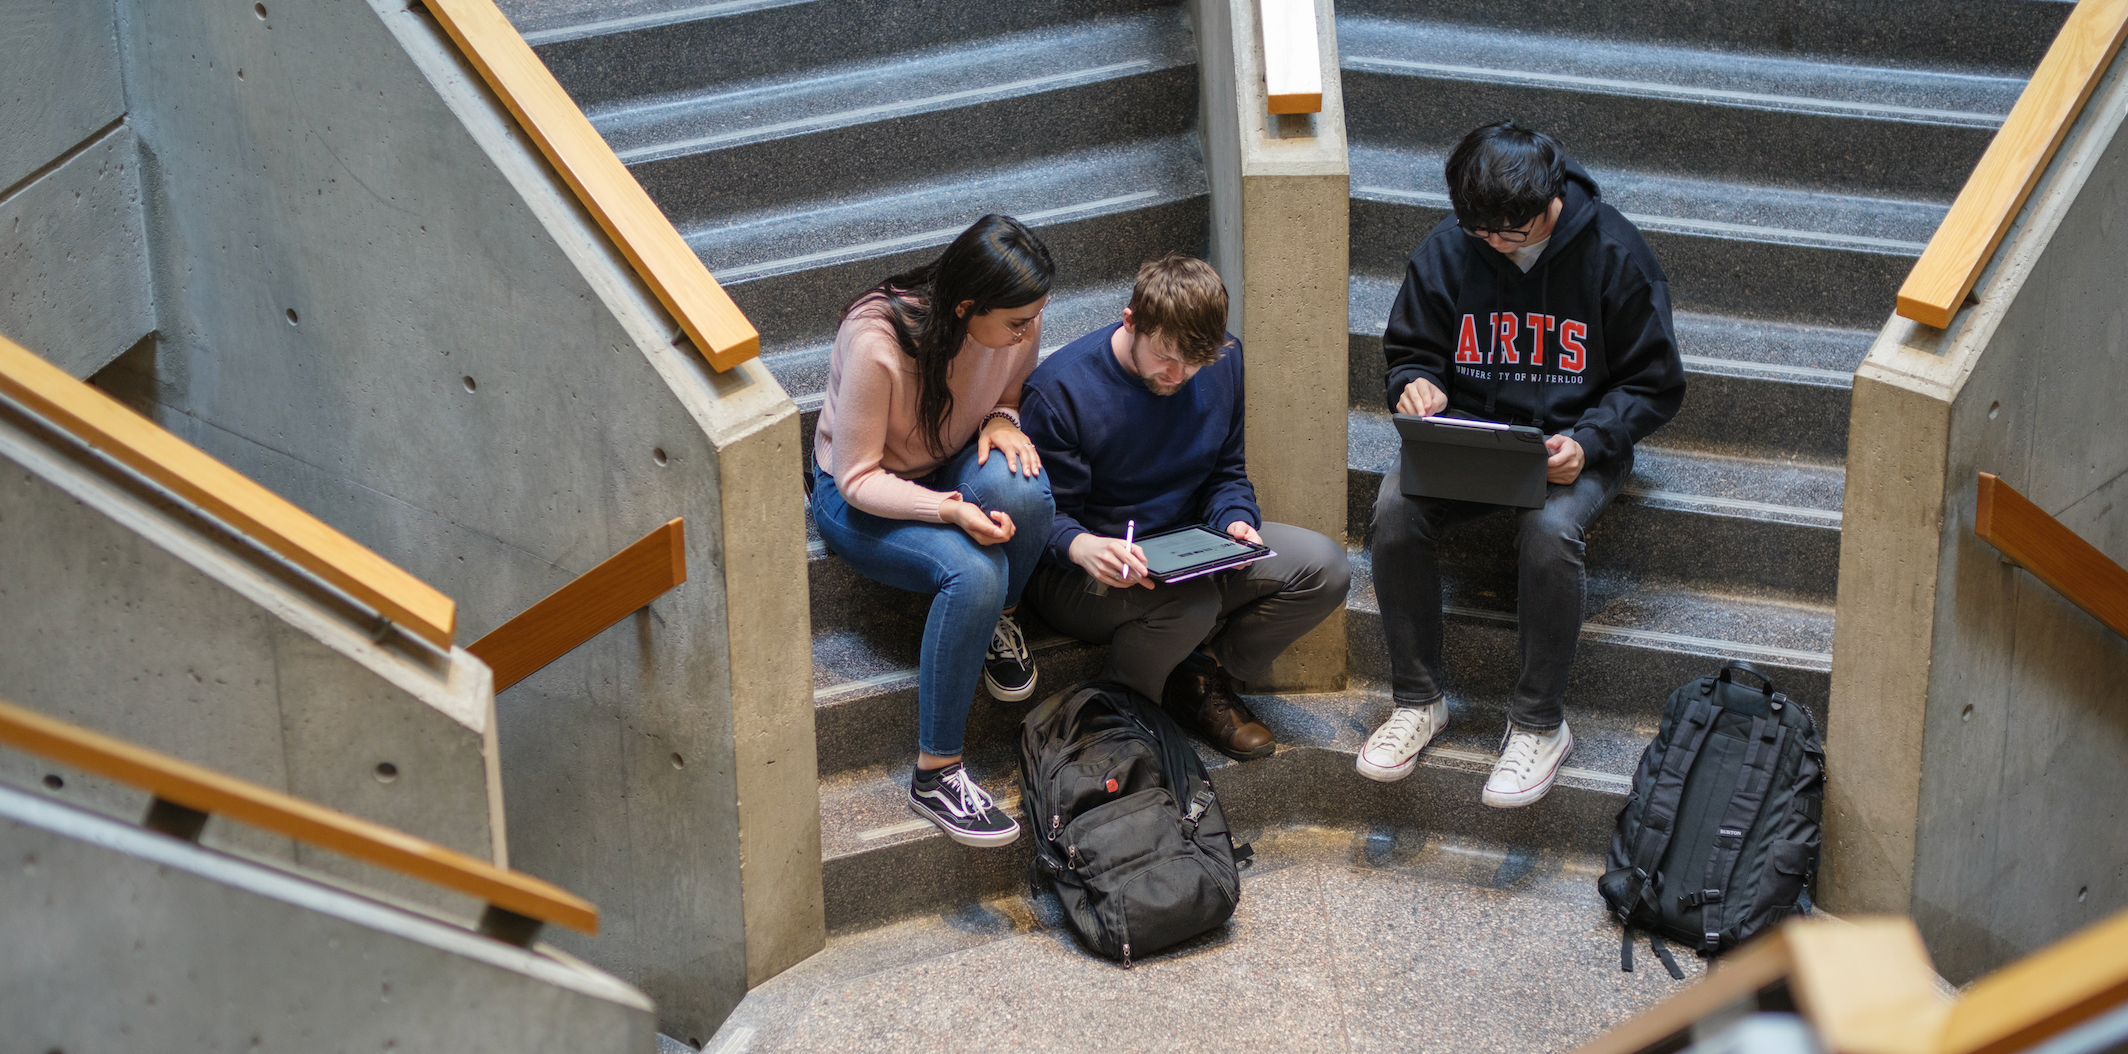 Students reading books while sitting on a staircase.